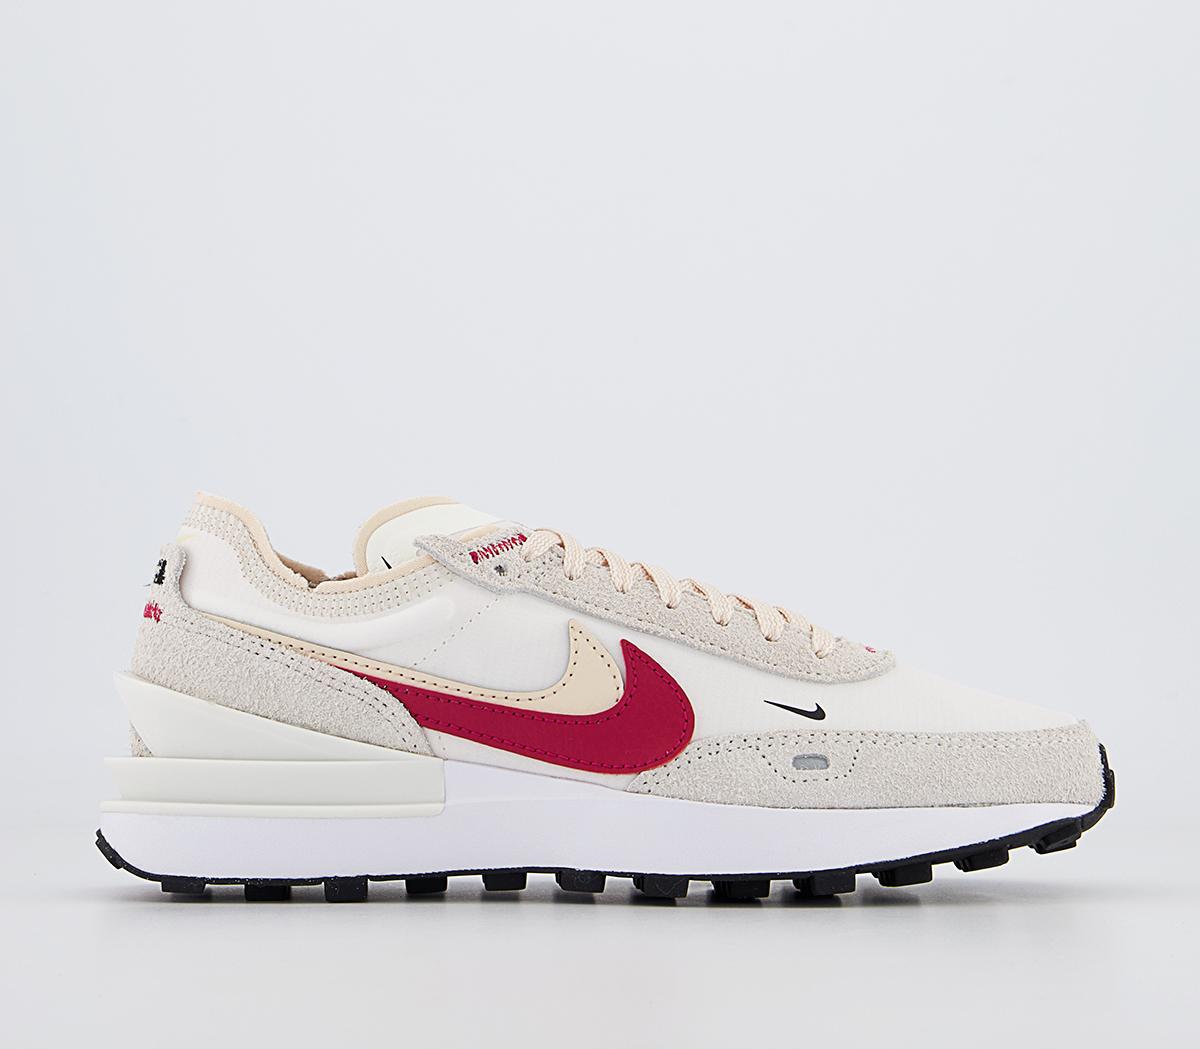 NikeNike Waffle One TrainersSail Gym Red Pearl White Black